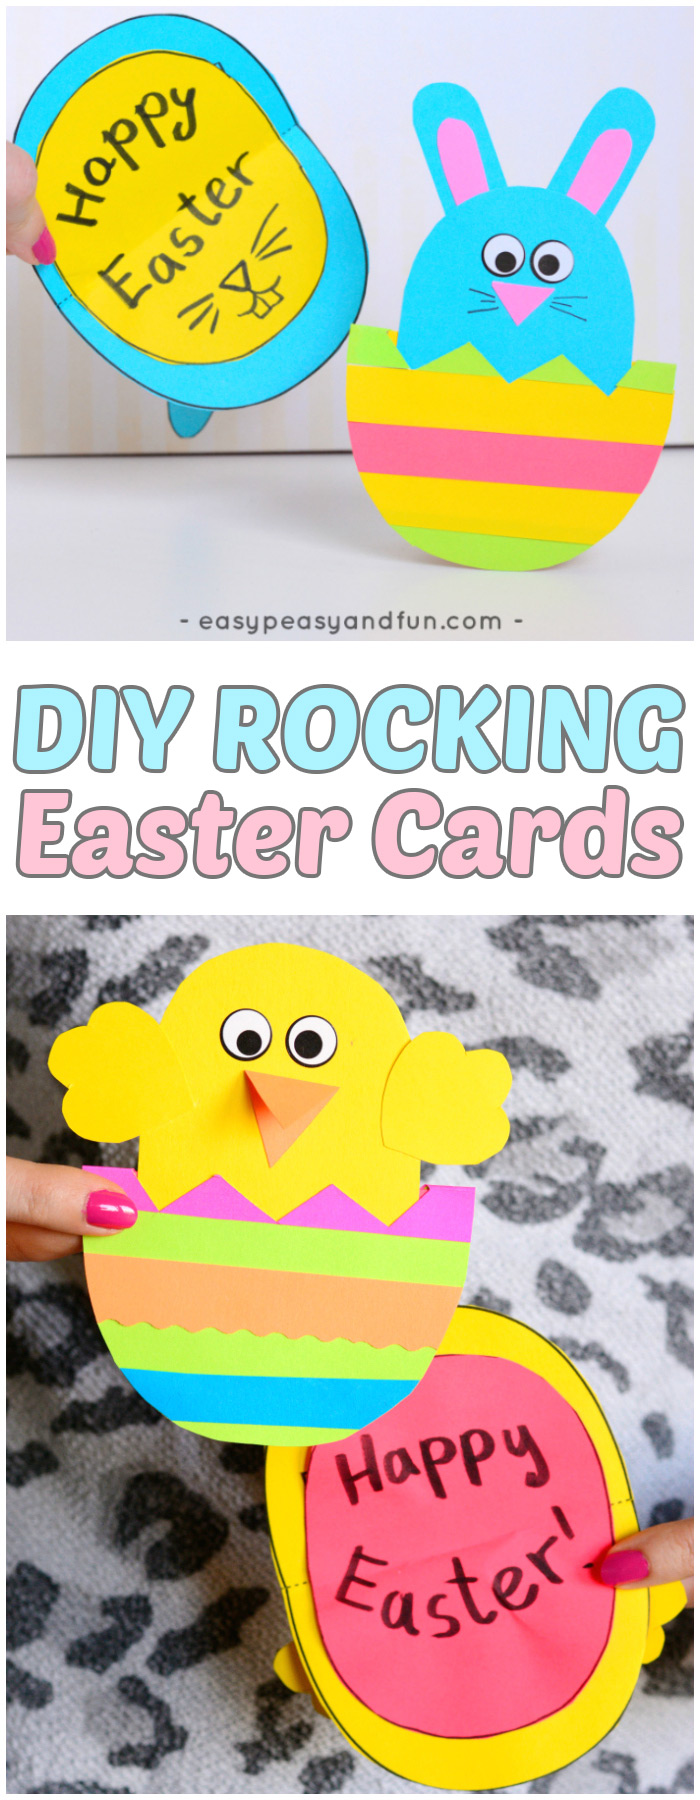 The most adorable DIY Easter cards - #colorize #ad with a waving chick and rabbit waving and opening